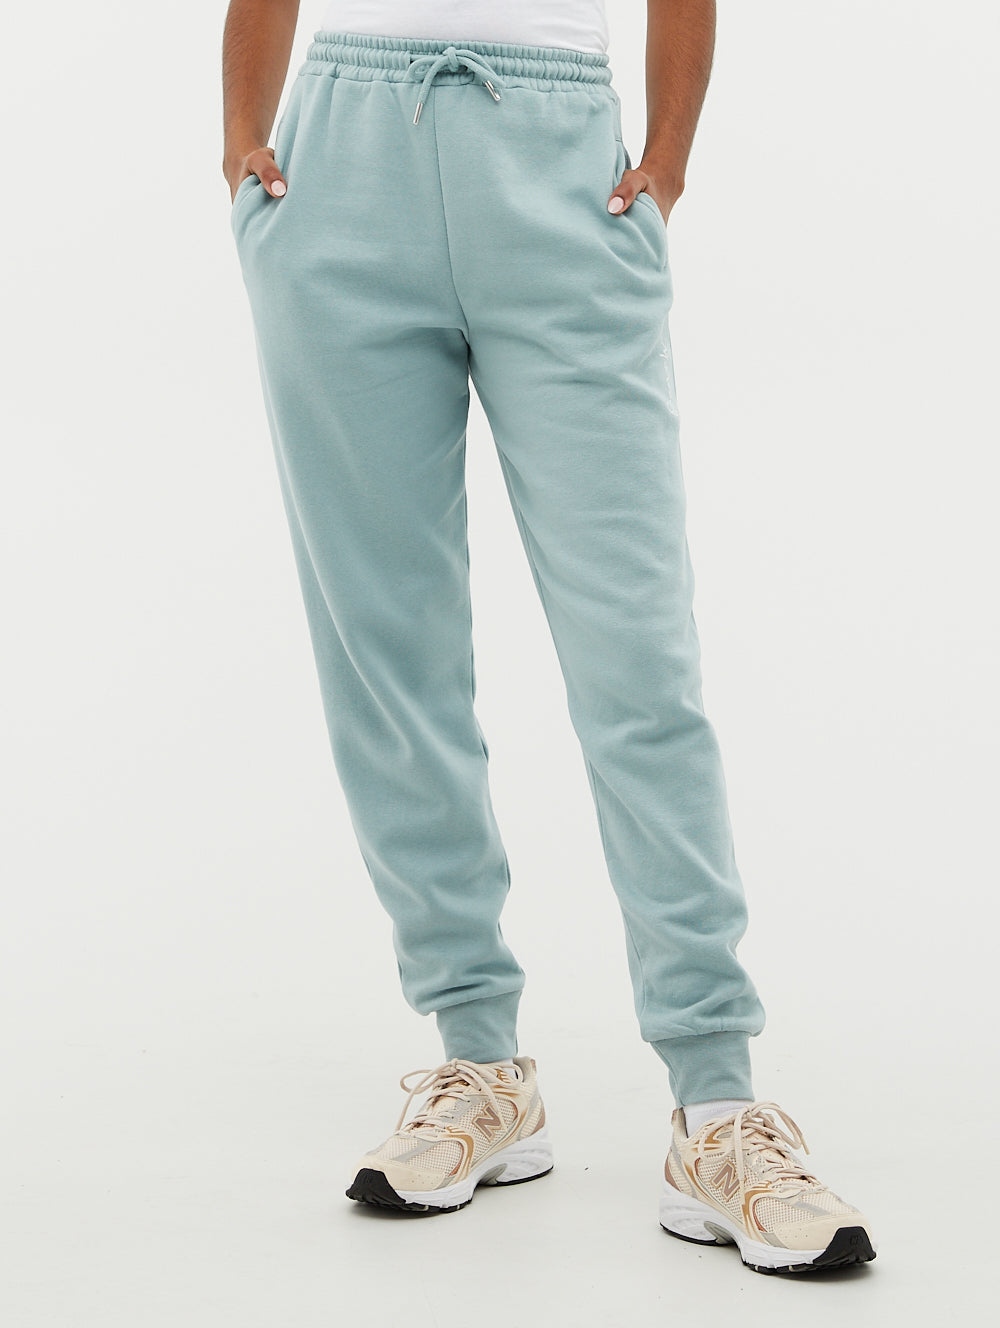 Coffee Run Cutie High Waist Butter Soft Joggers in Mint • Impressions  Online Boutique